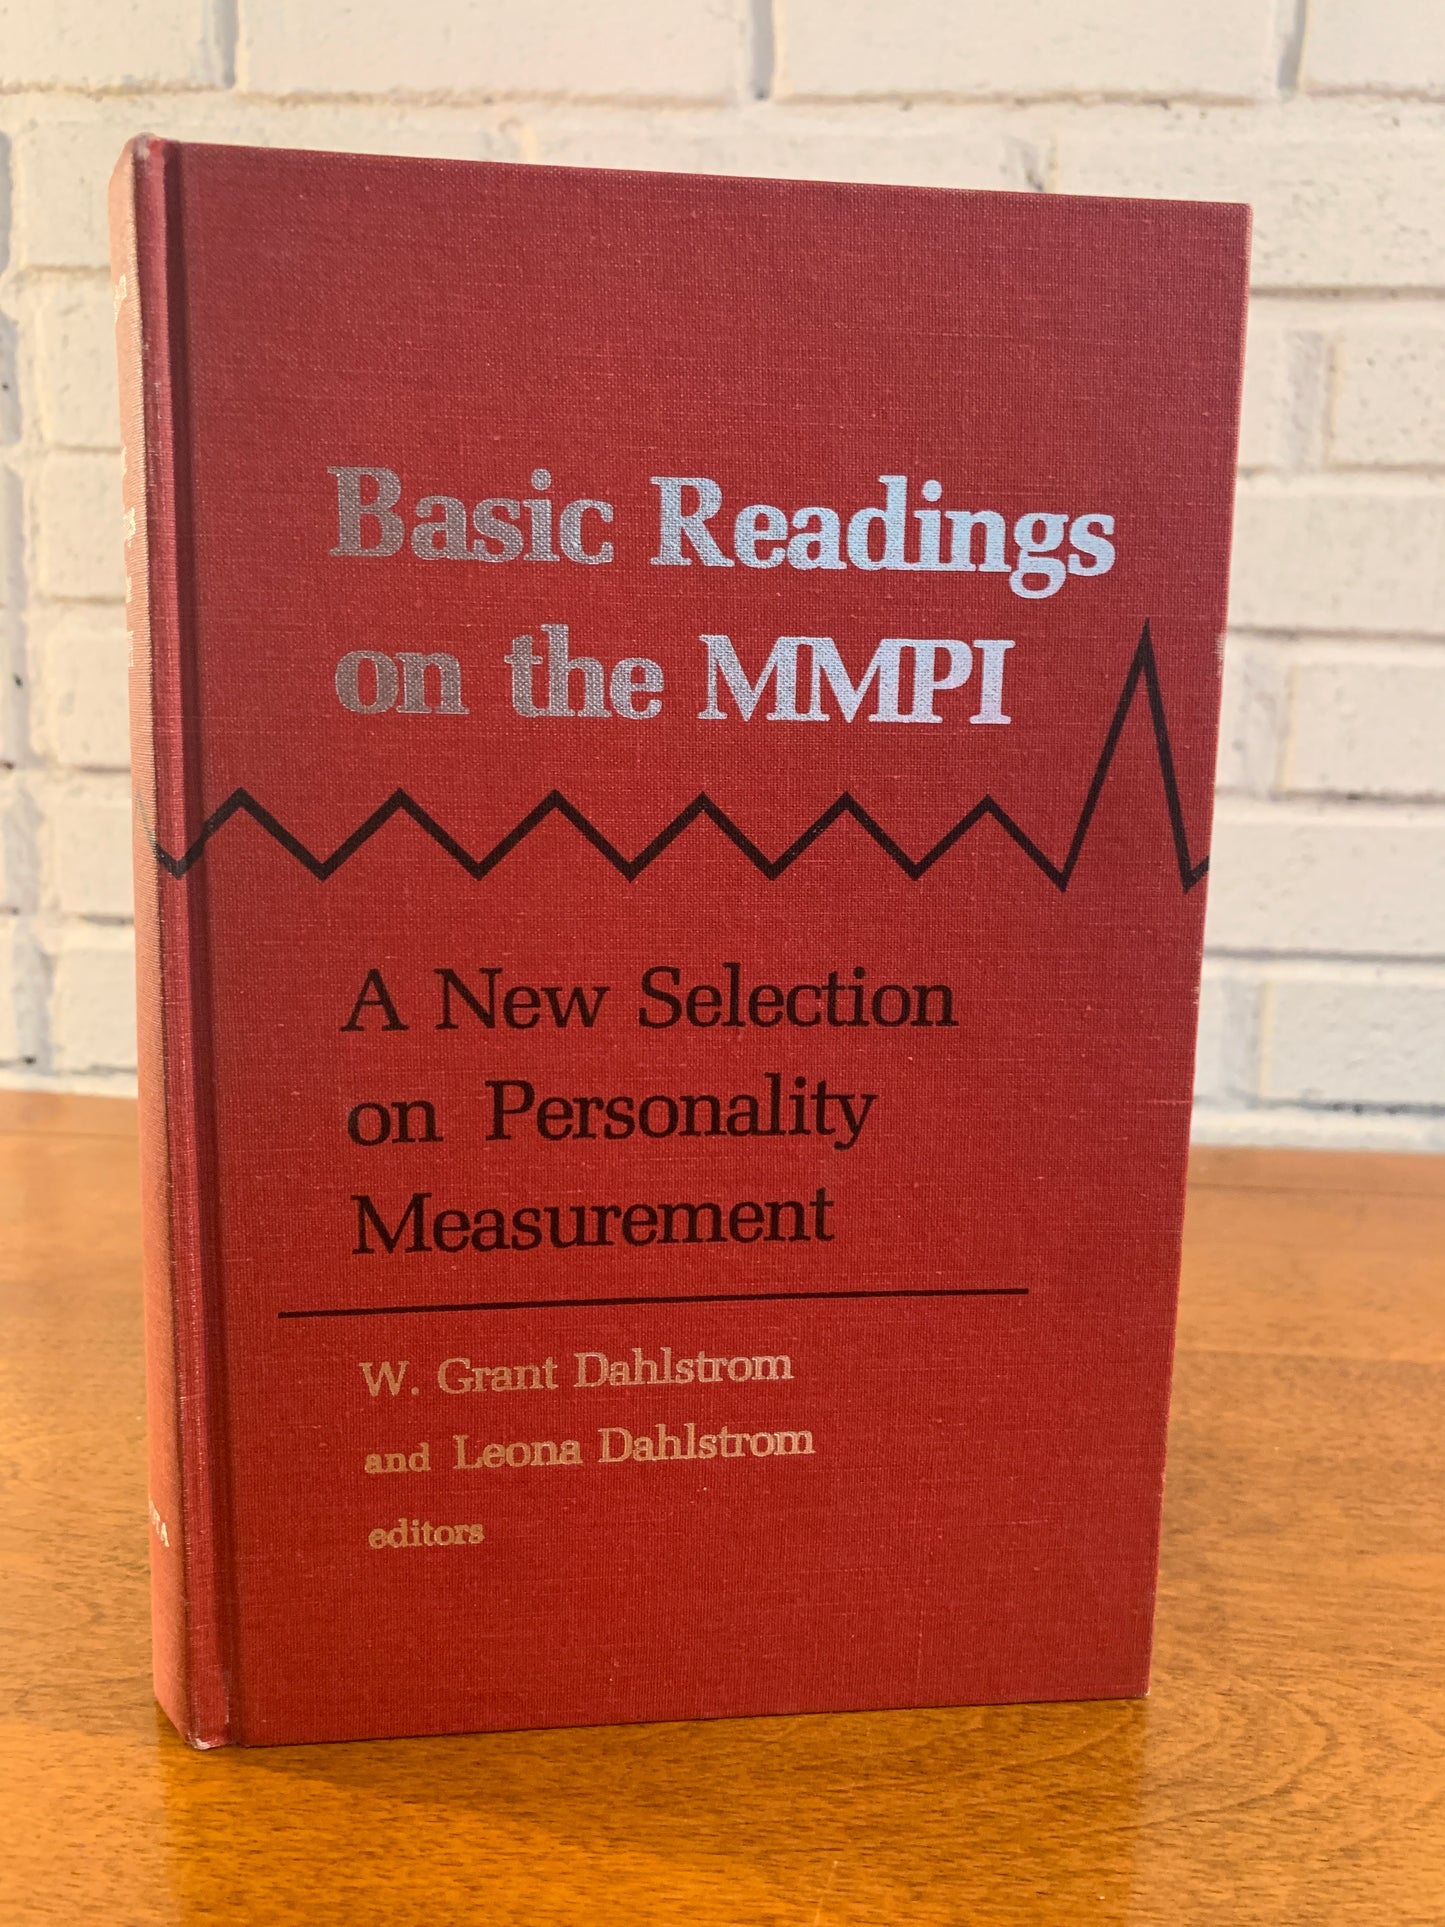 Basic Readings on the MMPI: A New Selection on Personality Measurement by W. Grant Dahlstrom and Leona Dahlstrom